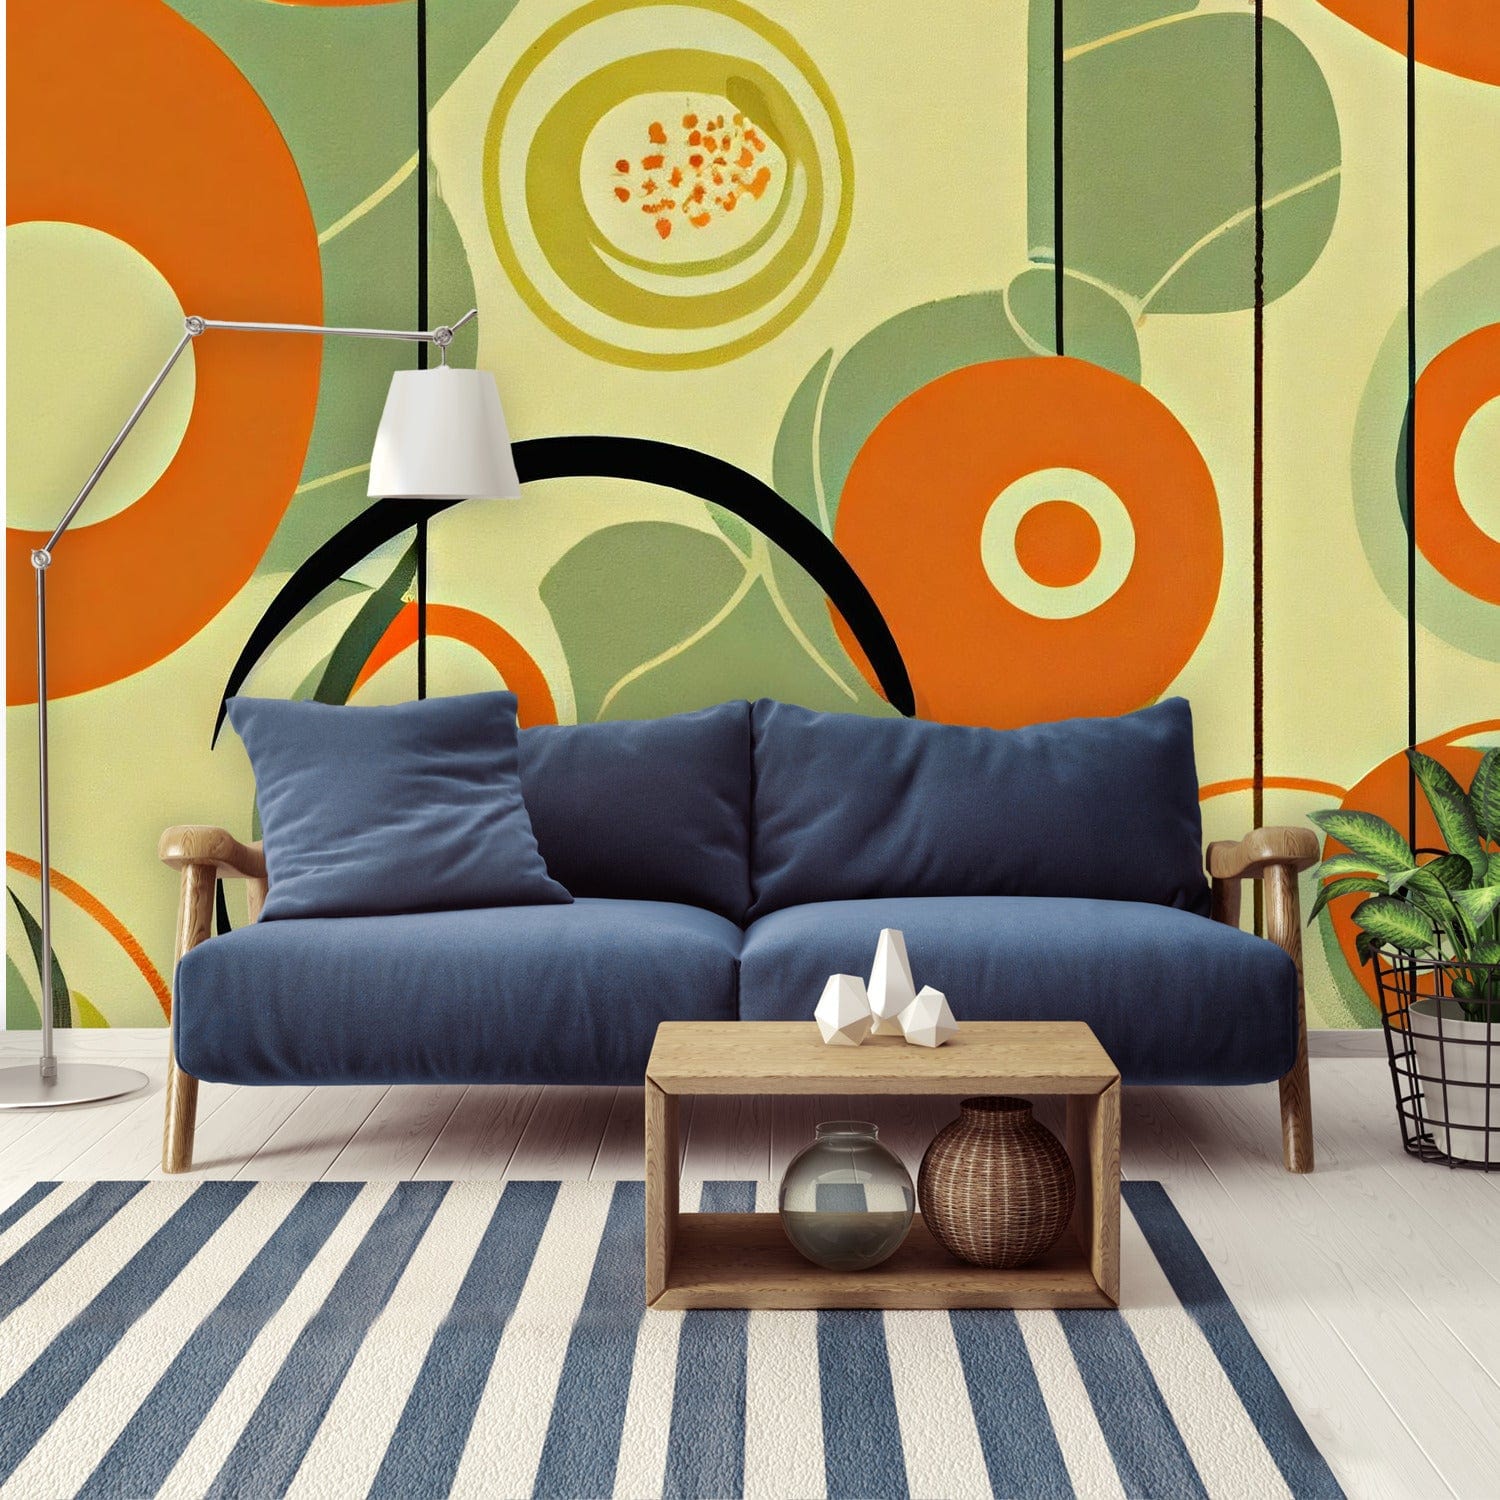 Mid Century Modern Wallpaper Groovy Green And Orange, Retro MCM Peel And Stick Wall Murals Wallpaper H96 x W140